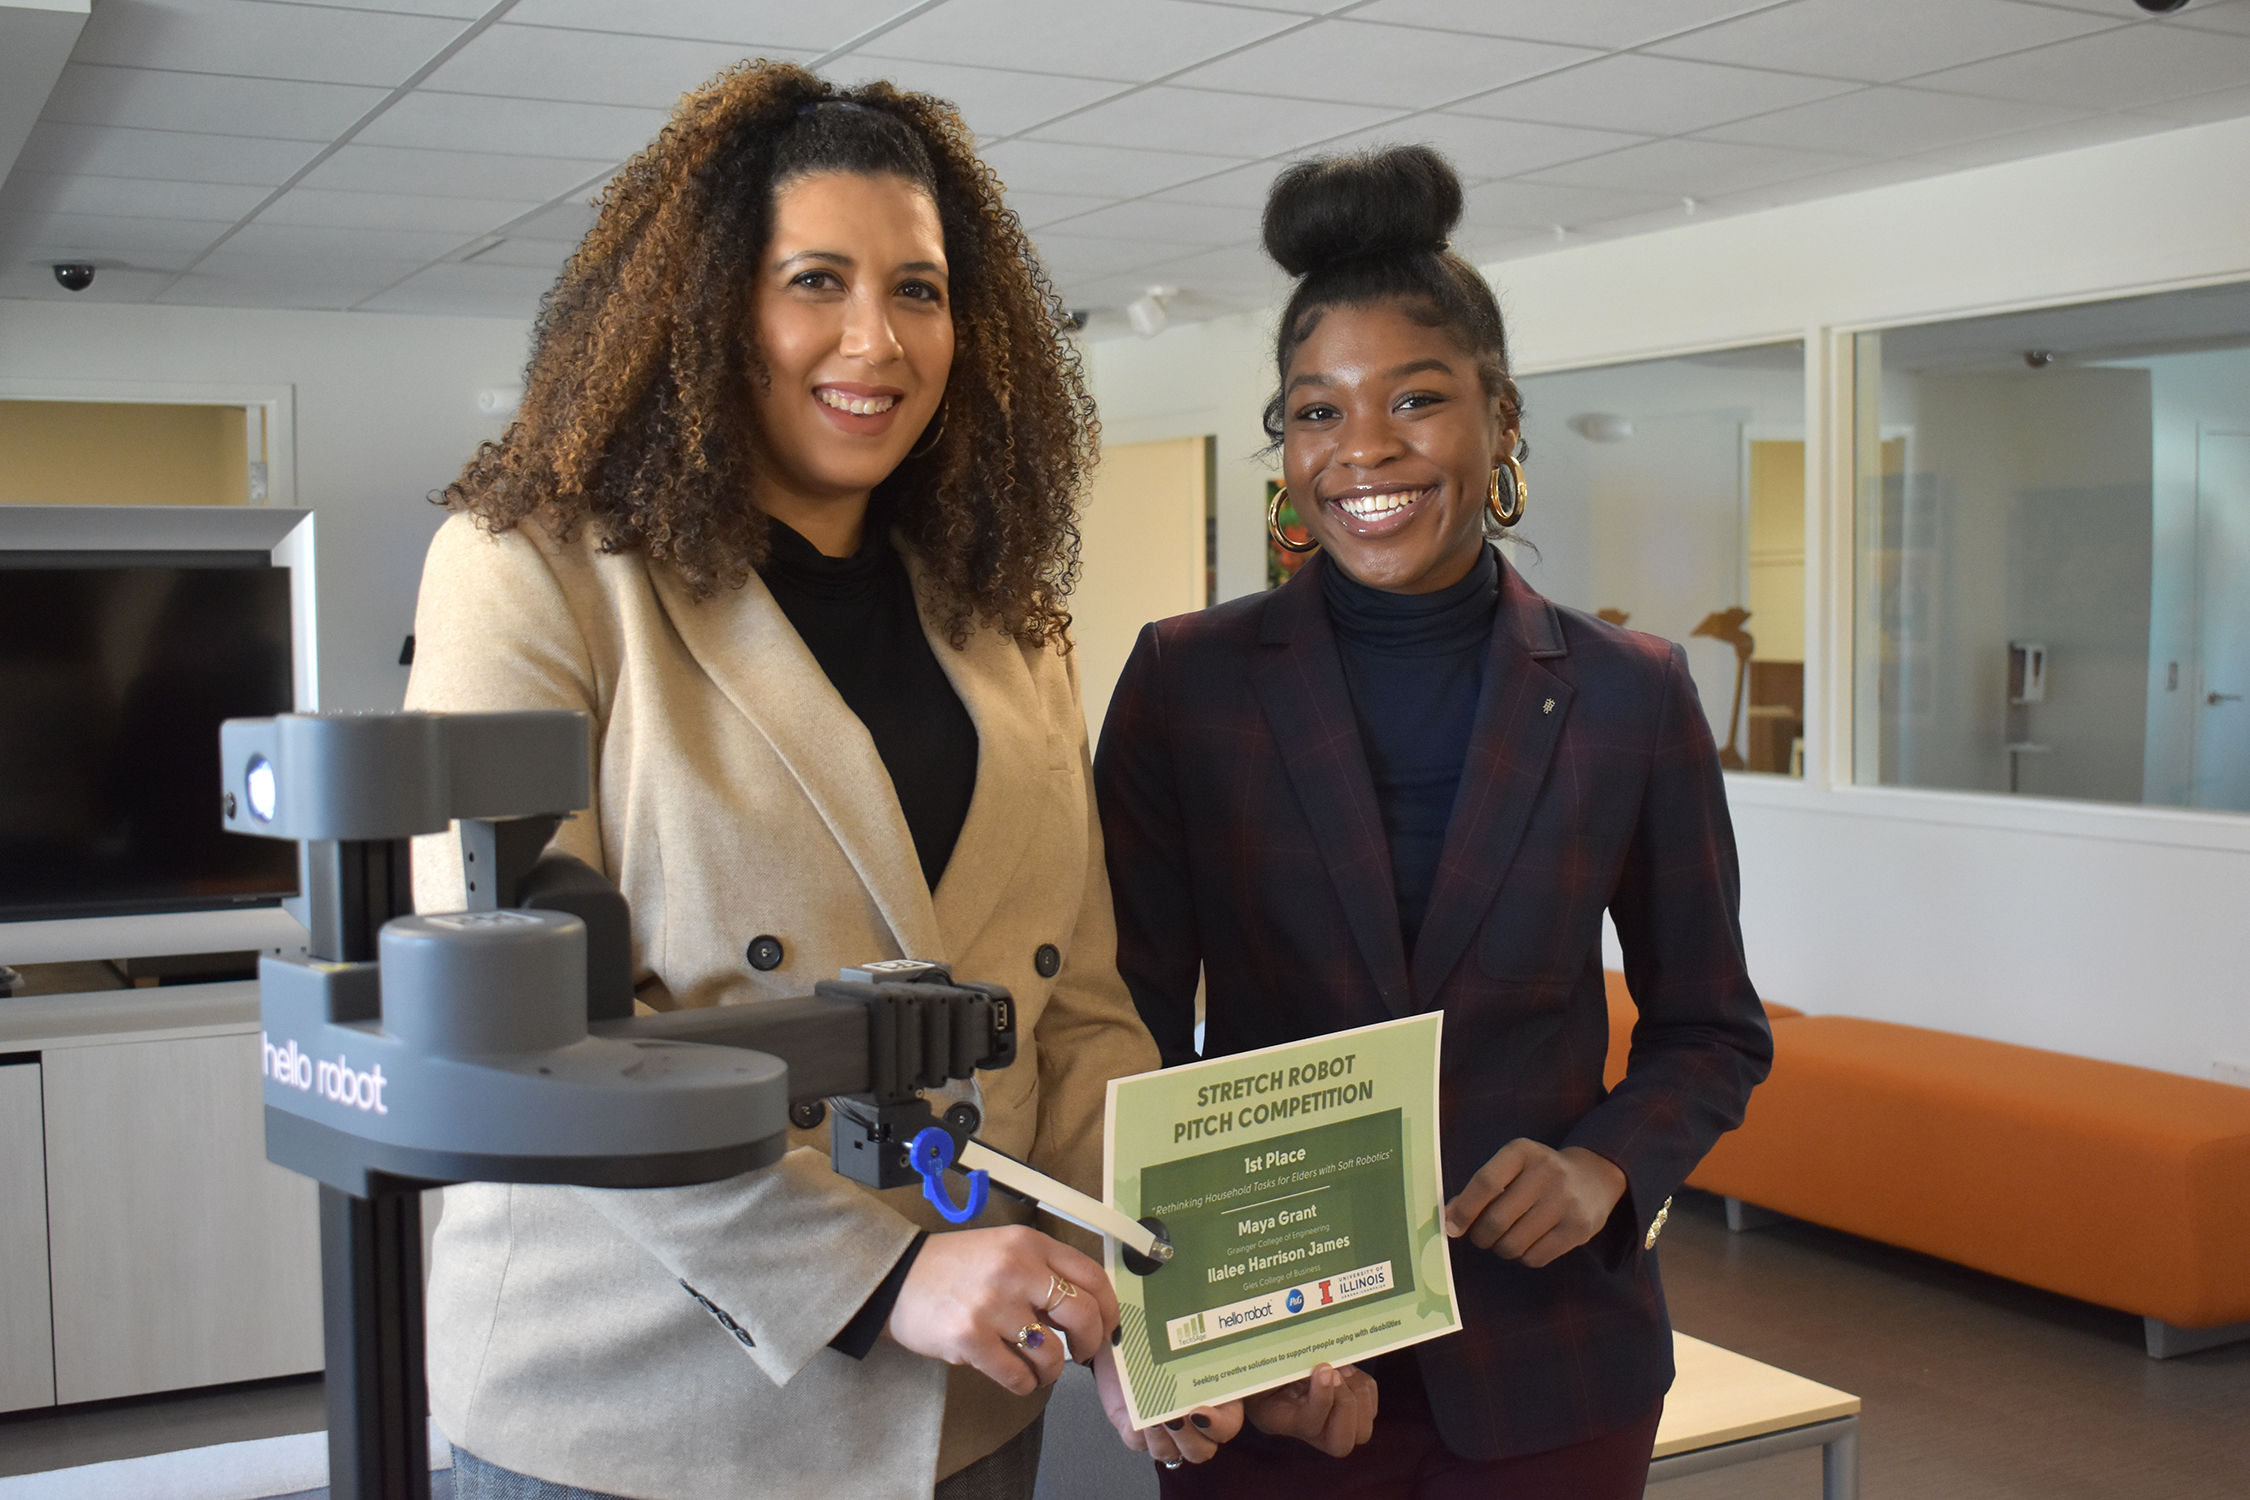 Ilalee Harrison James (left) and Maya Grant (right) post with Stretch Robot handing them an award certificate